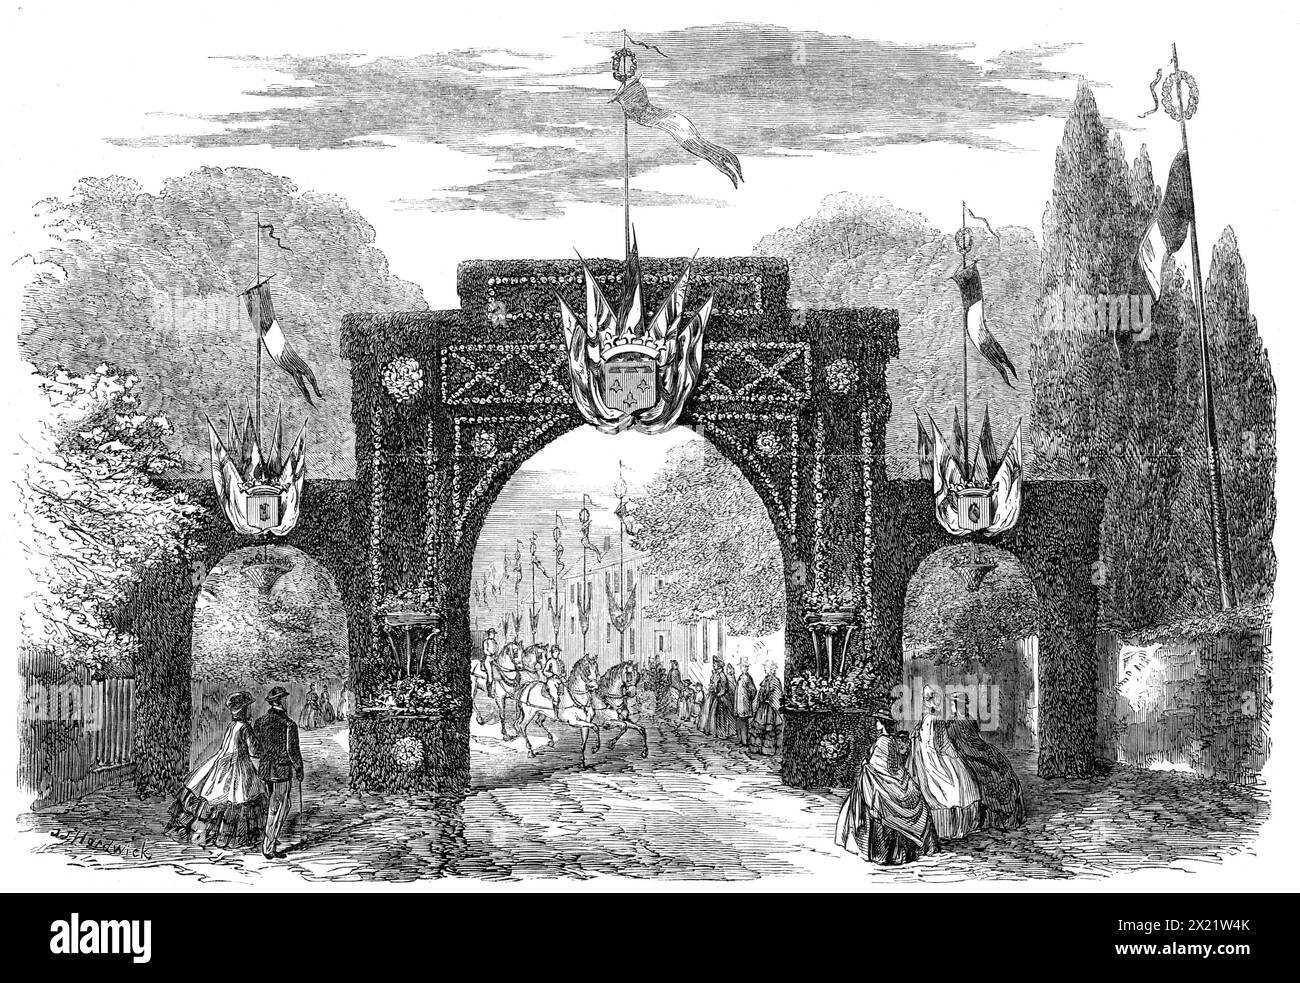 Marriage of the Count de Paris with the Princess Isabelle d'Orleans: triumphal arch at Esher, 1864. '...Louis Philippe Albert d'Orleans, the Count de Paris, son of the Duke of Orleans and grandson of King Louis Philippe, was married to his first cousin, Princess Maria Isabella Francesca d'Assisi, daughter of the Duke de Montpensier, and niece, by her mother's side, to the Queen of Spain...After the ceremony...the young Count and Countess de Paris entered their carriage to return to Claremont, amidst all manner of festive demonstrations - cheering, and firing of cannon, and ringing of bells - i Stock Photo